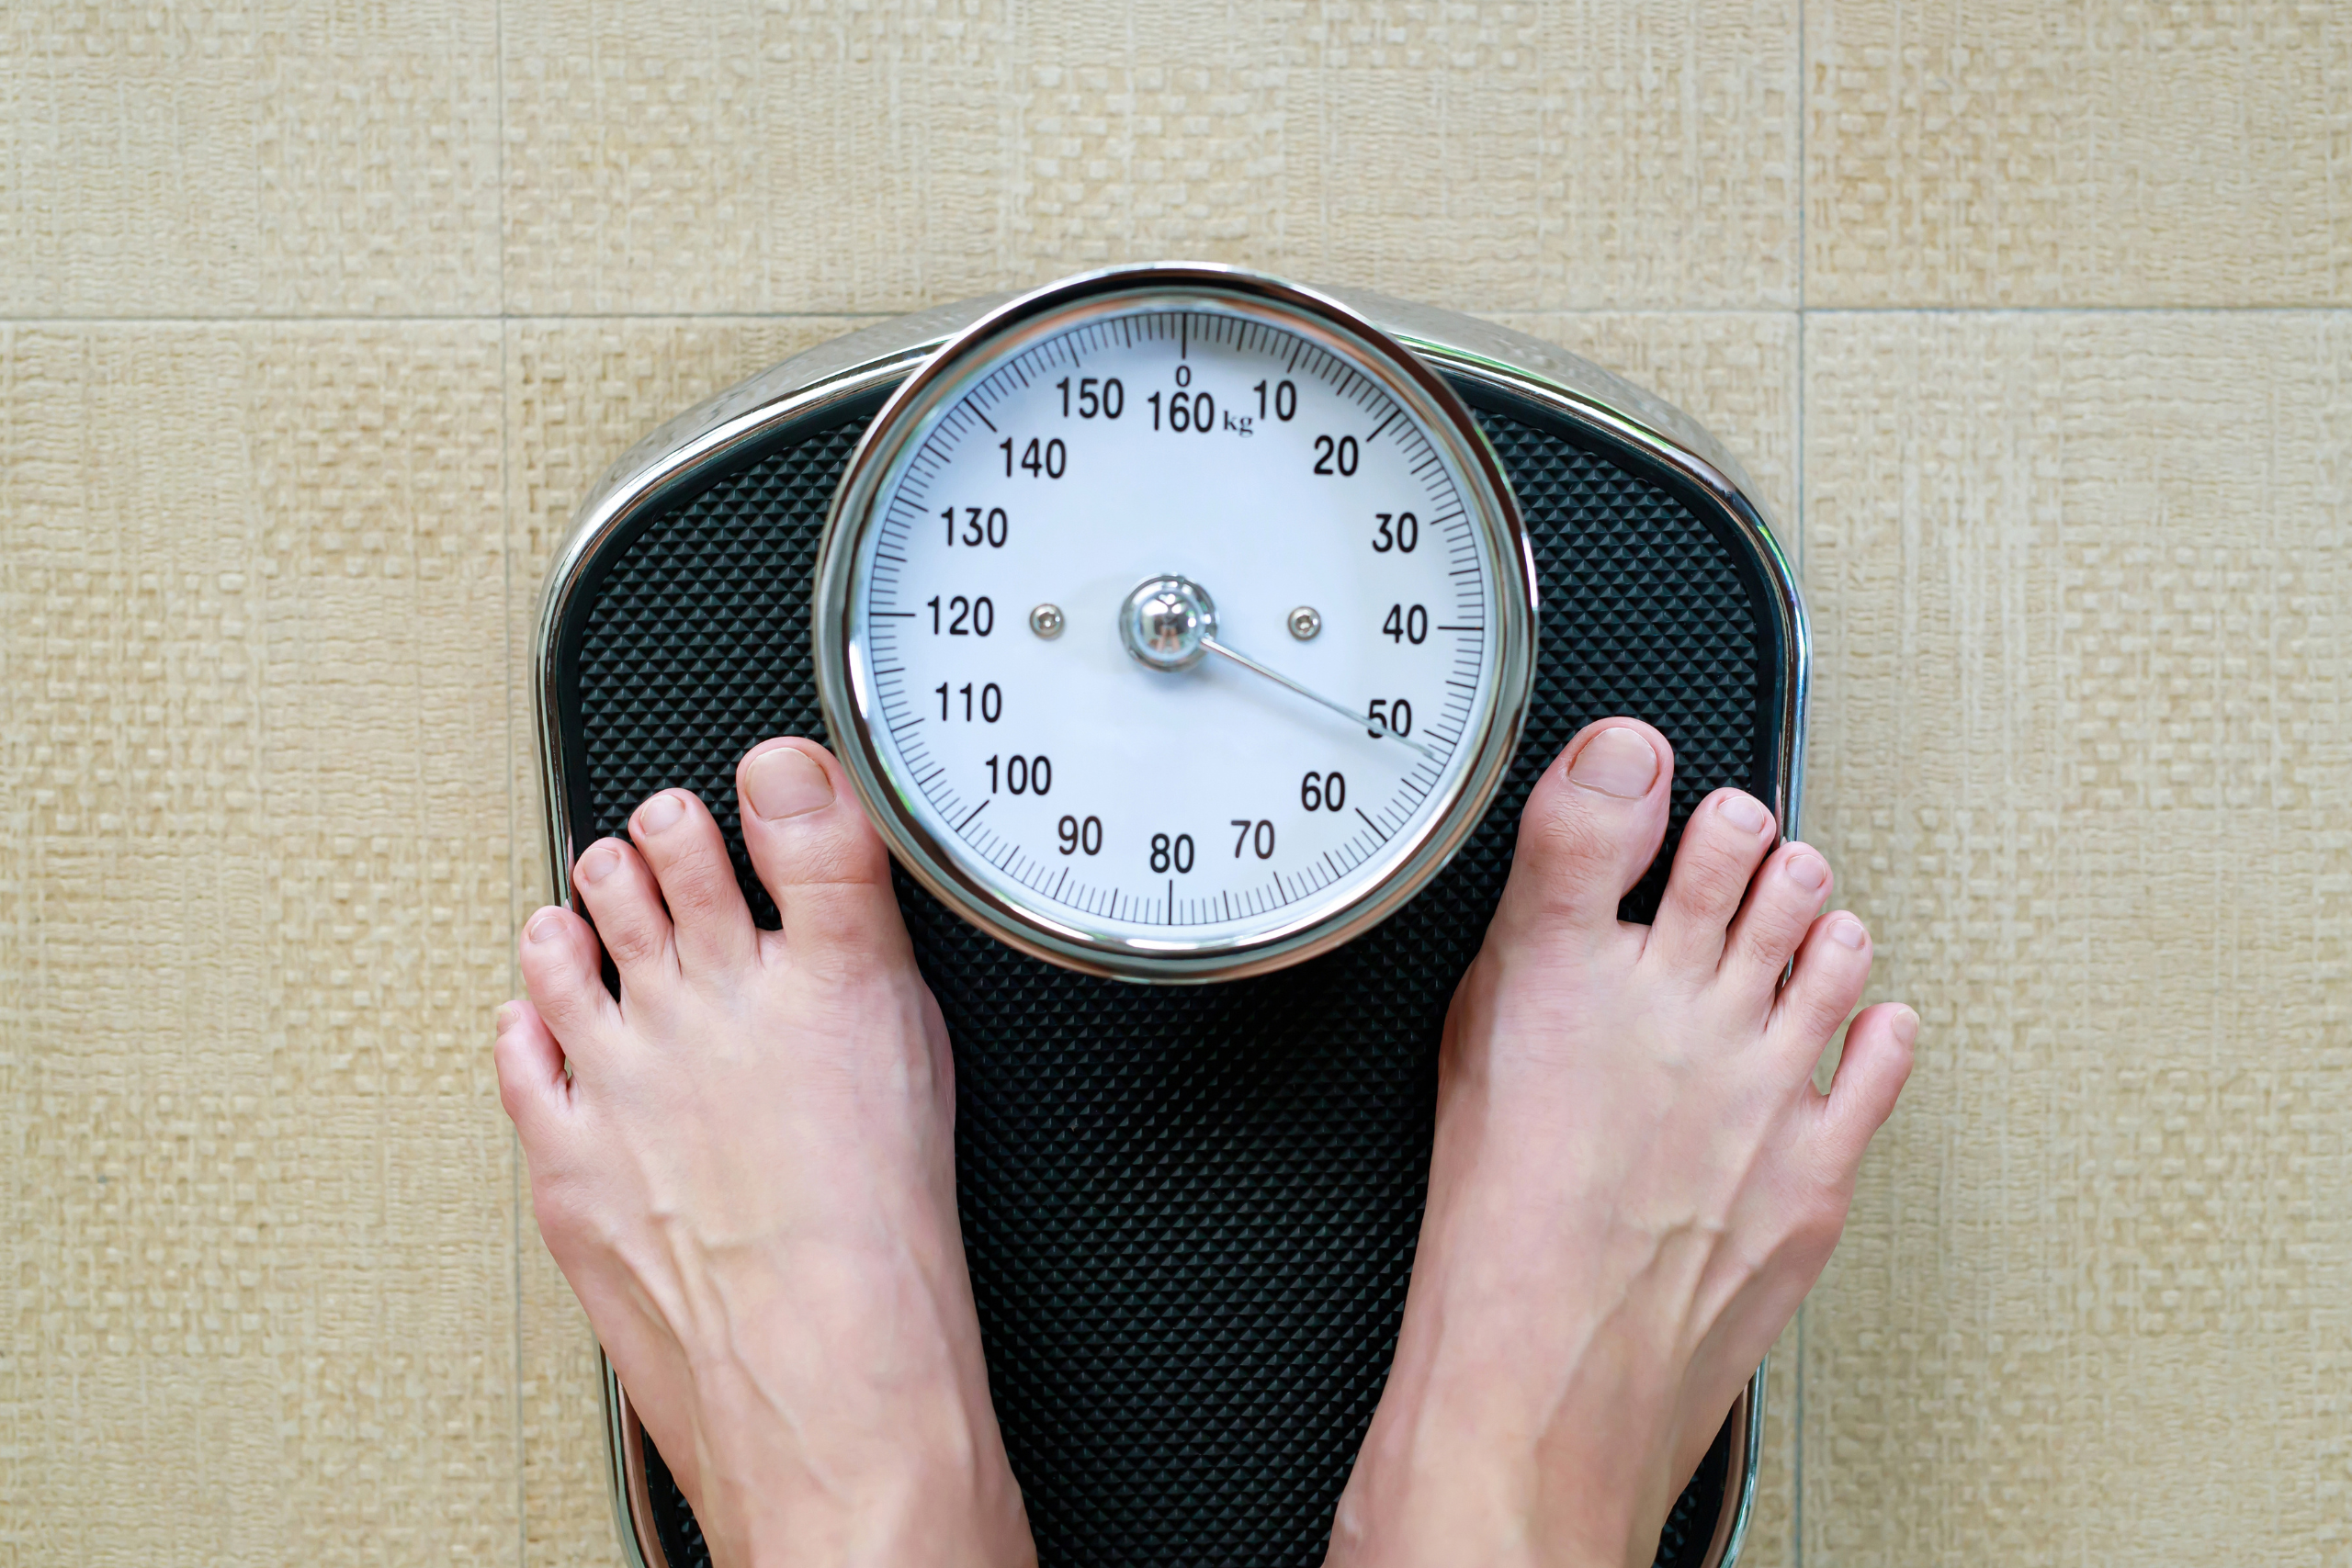 Close-up view of bare feet on a mechanical bathroom scale, illustrating weight monitoring or a health and wellness concept.